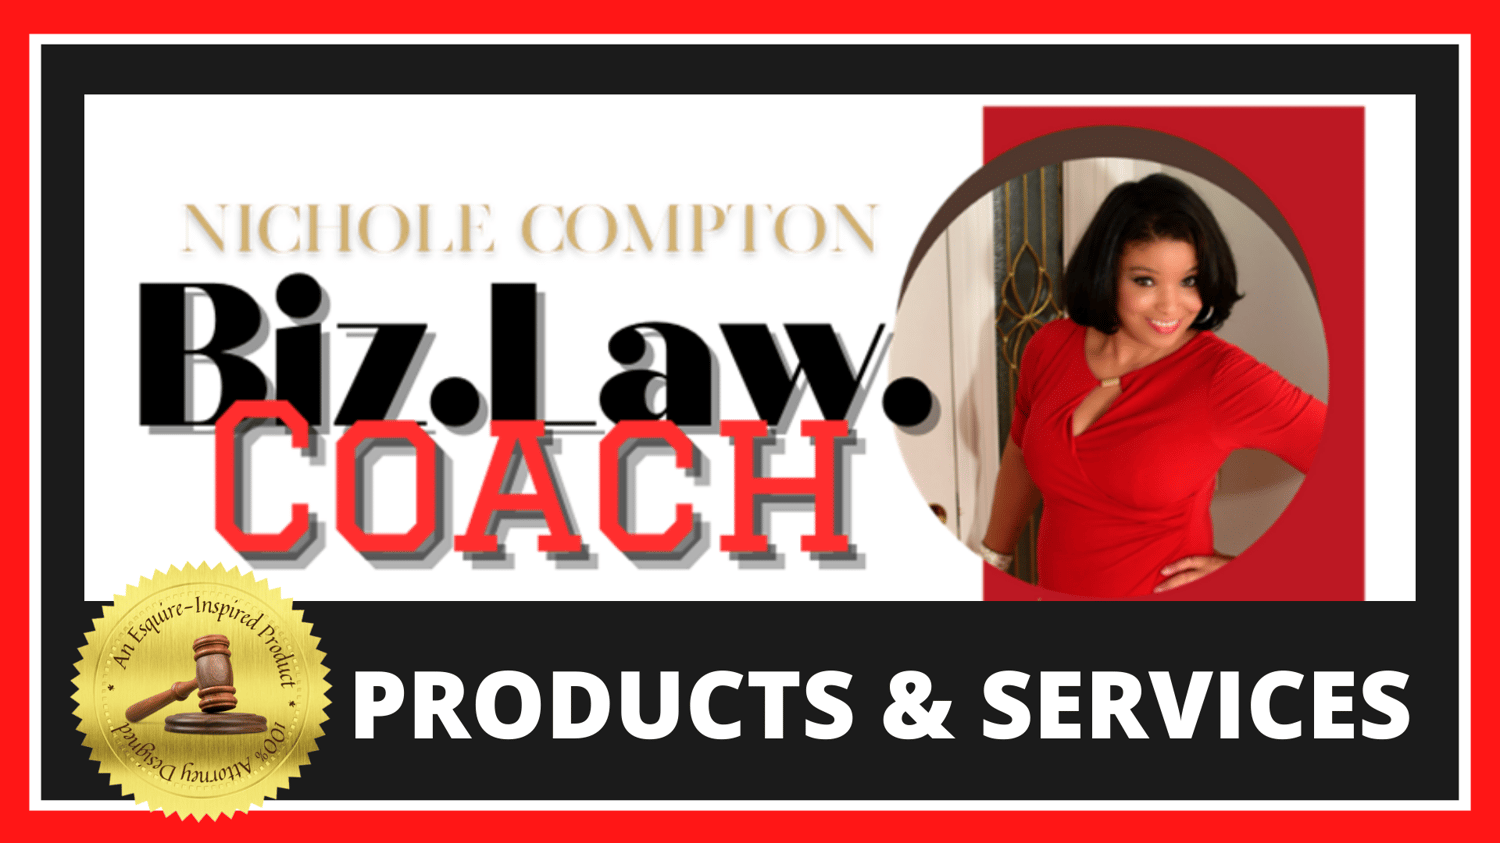 Nichole Compton LLC - Esquire-Inspired Products and Services for Biz.Law Coach Attorney Nichole T. Compton